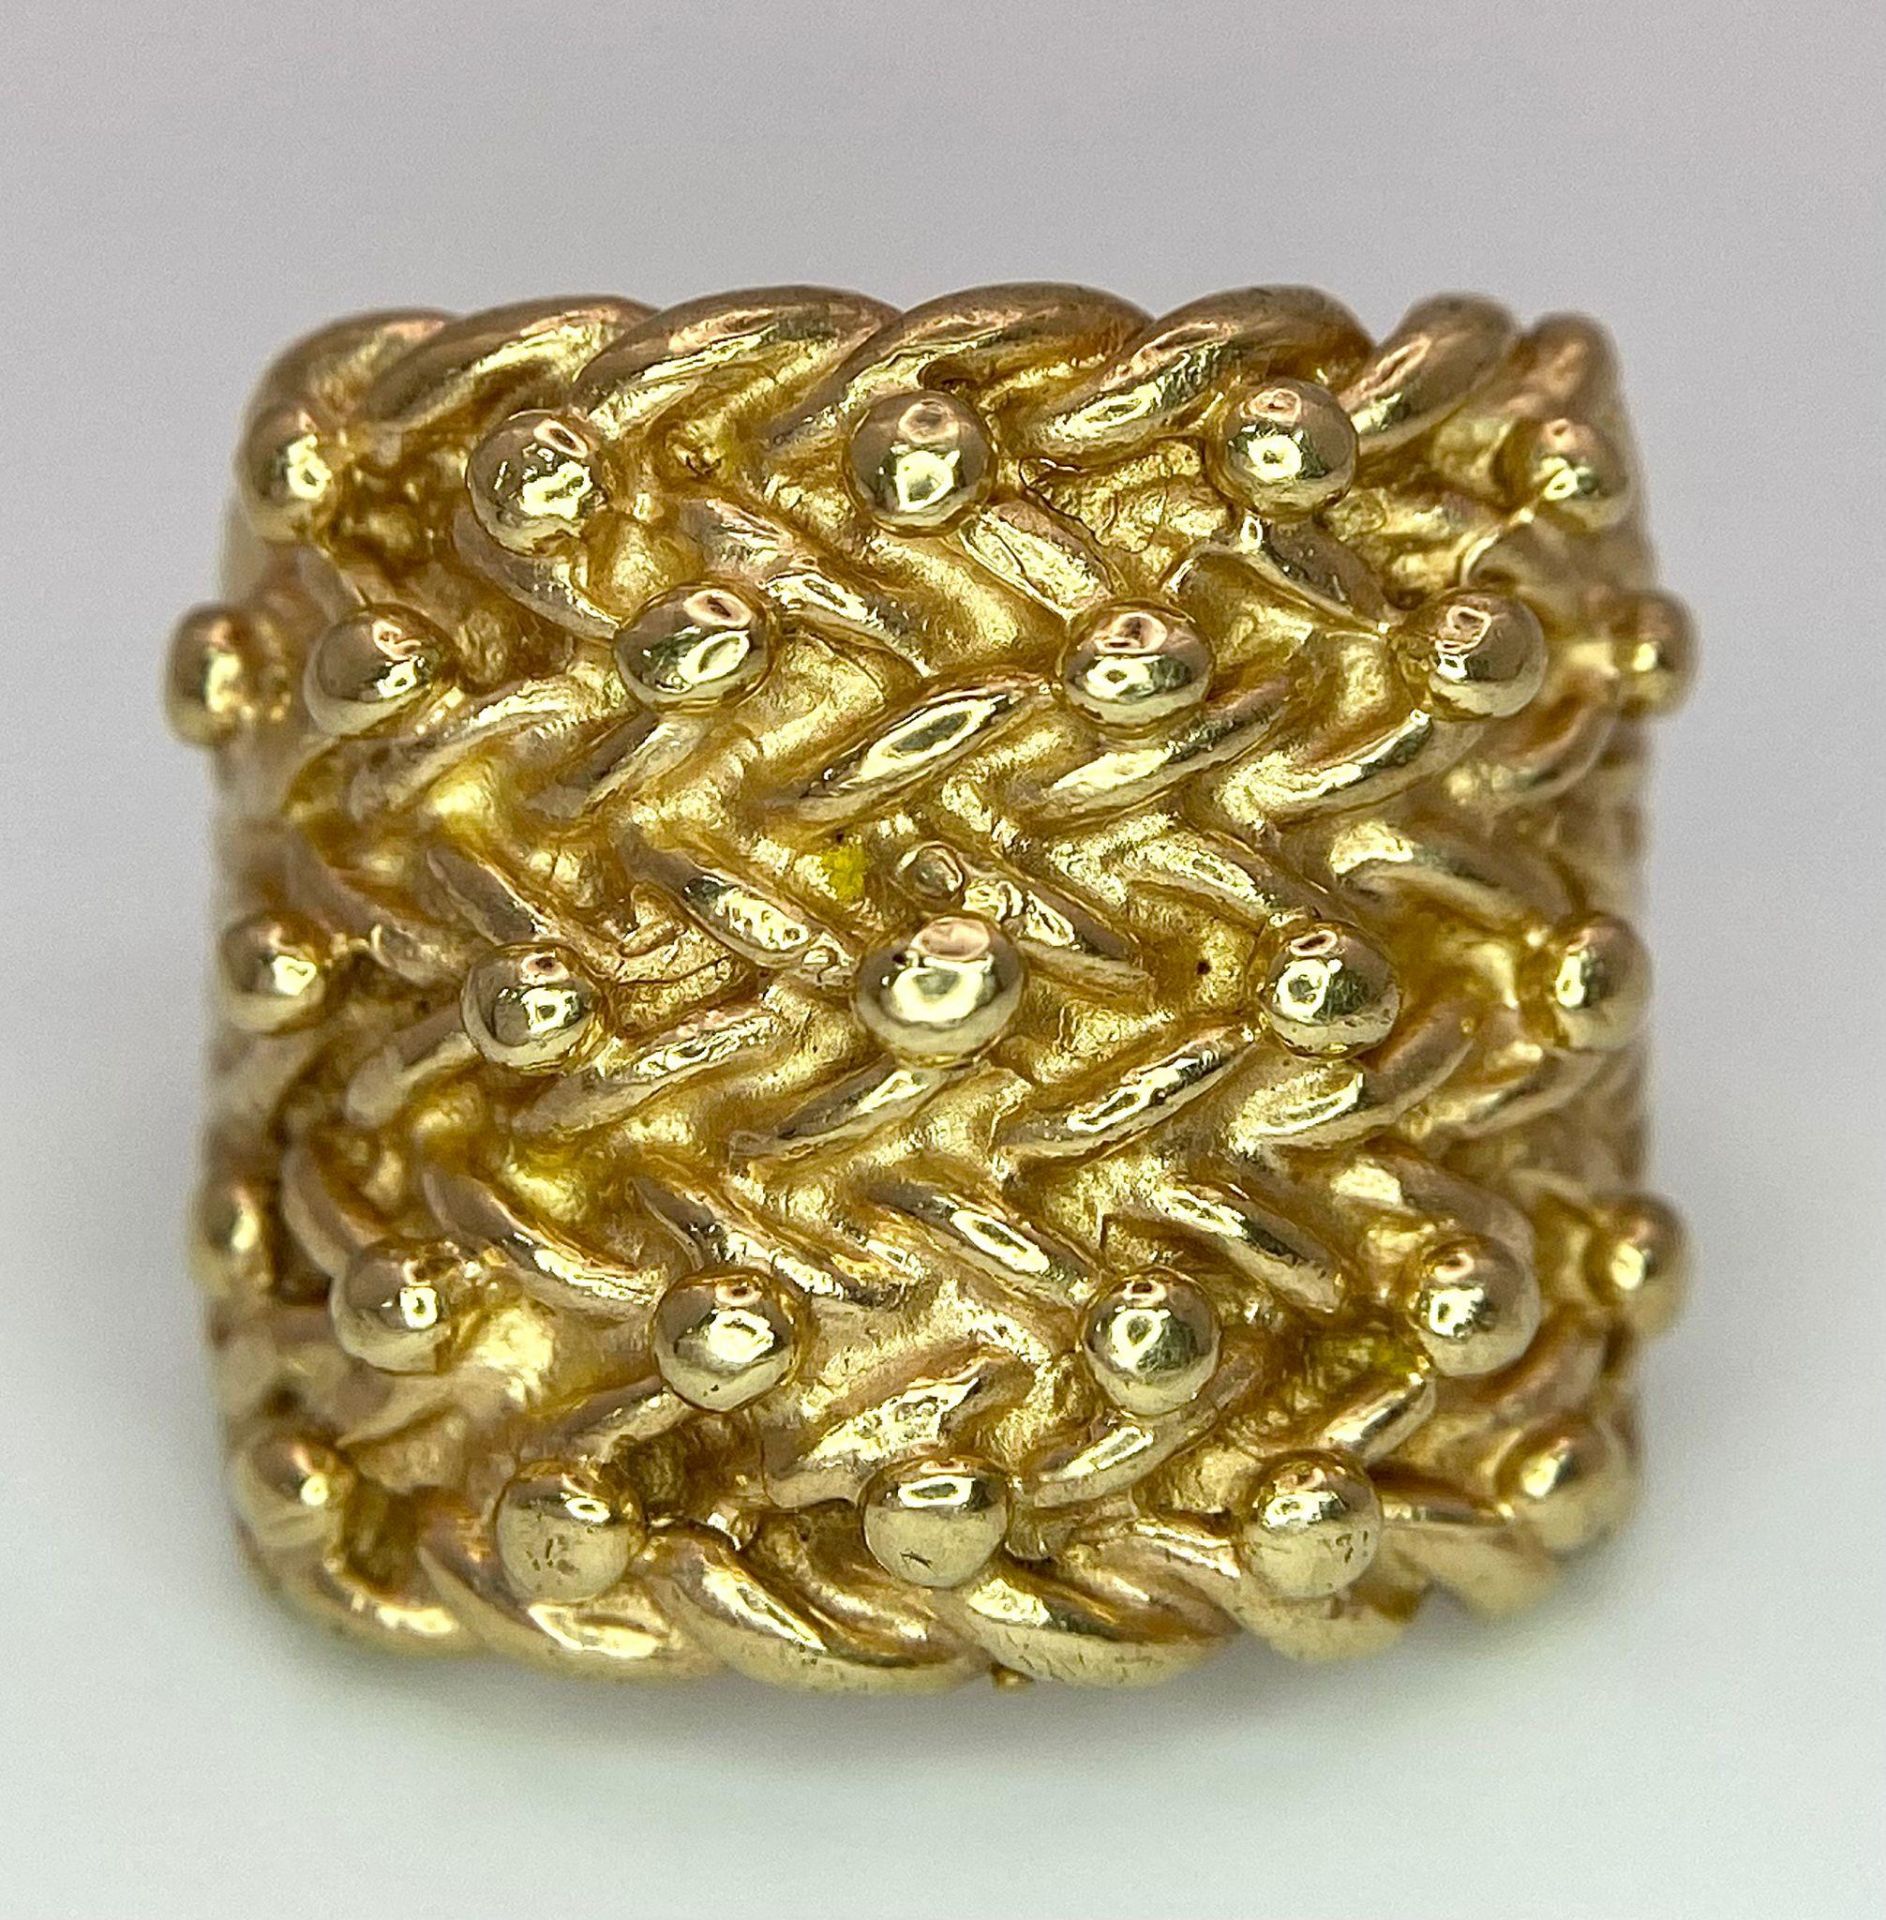 A LARGE AND HEAVY 9K YELLOW GOLD SHOT/KEEPER RING, WEIGHT 13G AND SIZE T - Image 2 of 6